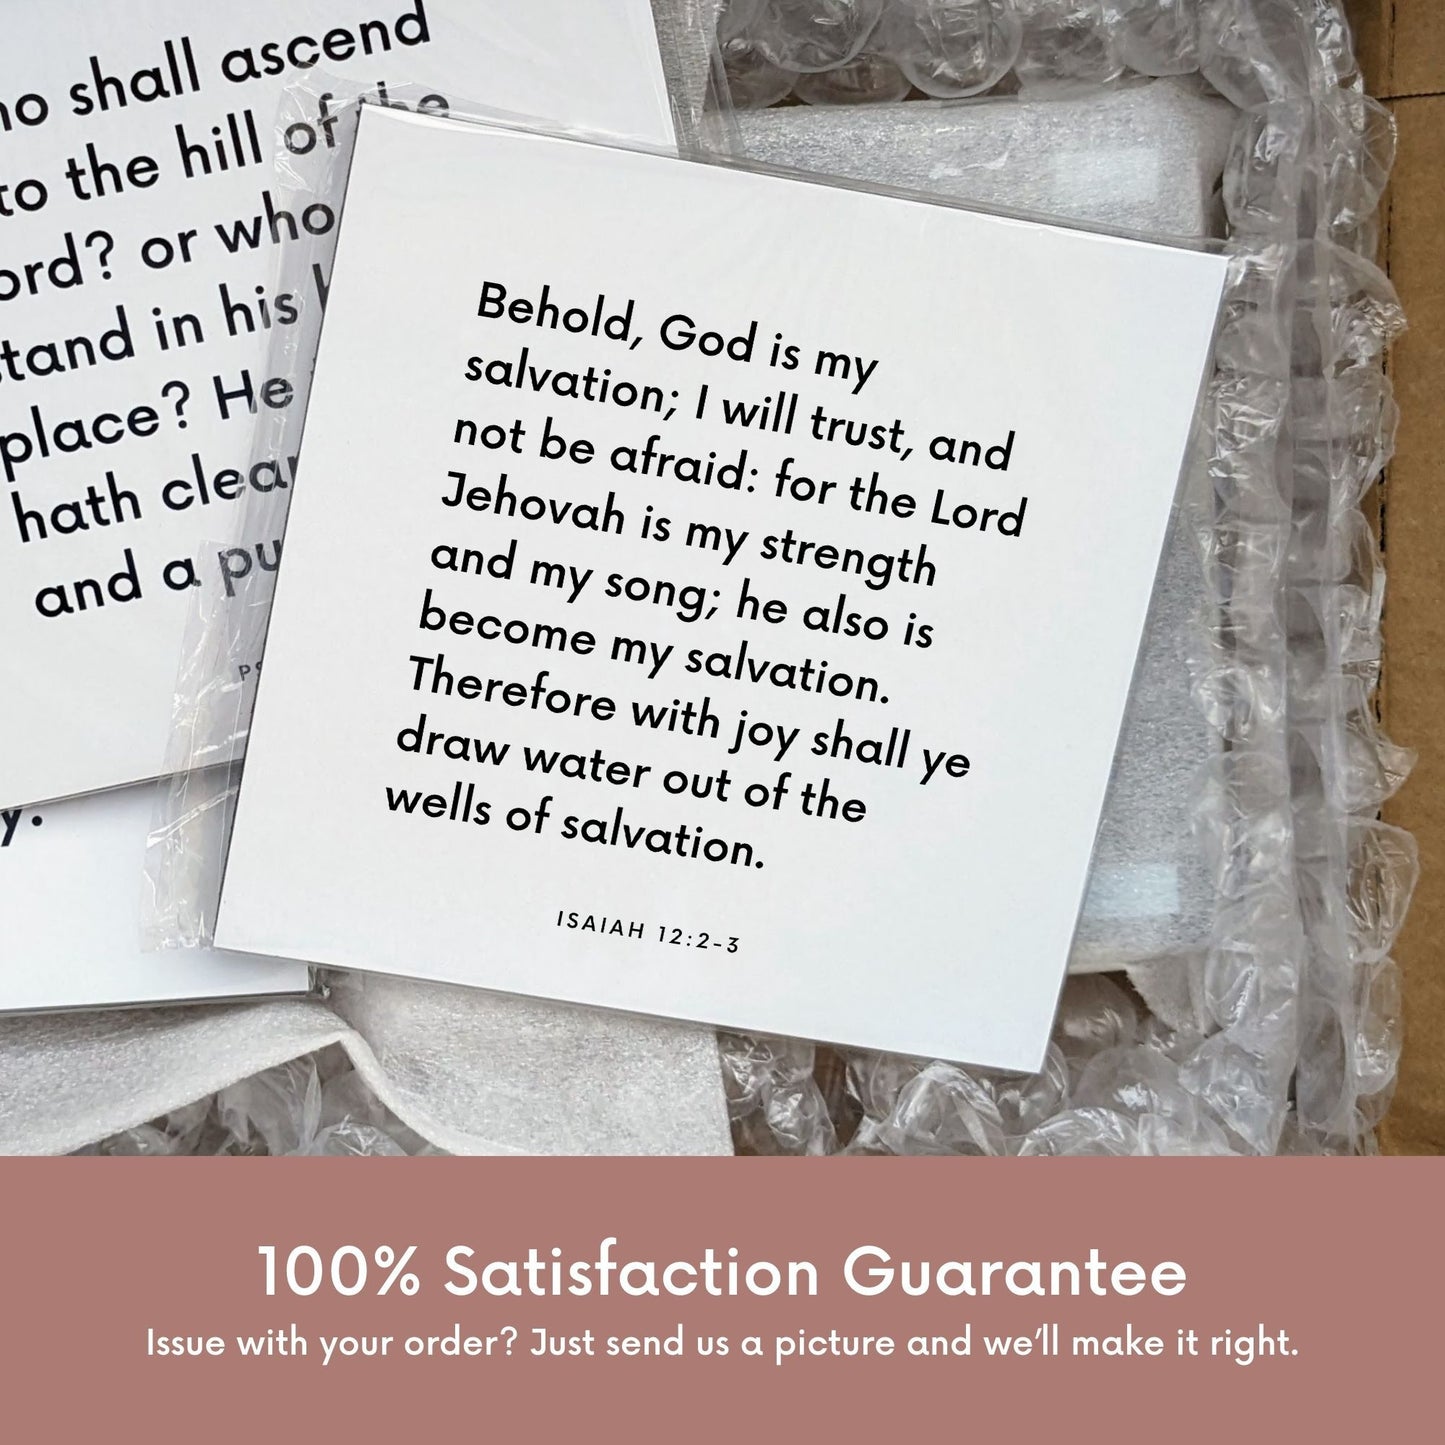 Shipping materials for scripture tile of Isaiah 12:2-3 - "The Lord Jehovah is my strength and my song"